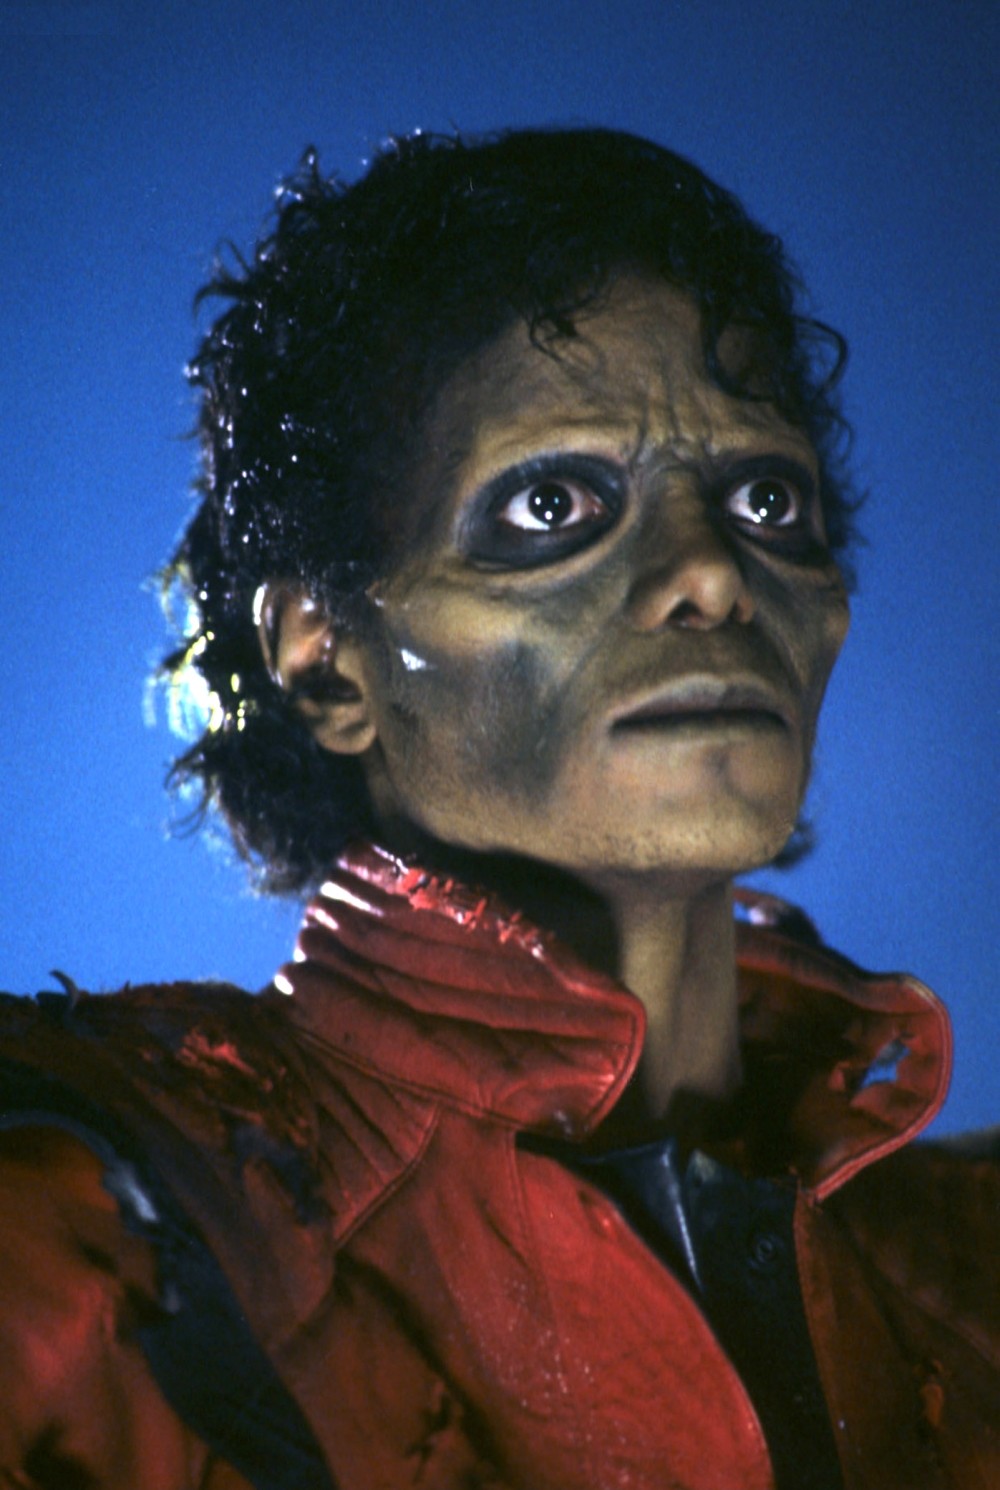 It's Time to Watch Michael Jackson's Thriller Again - Bloody Disgusting